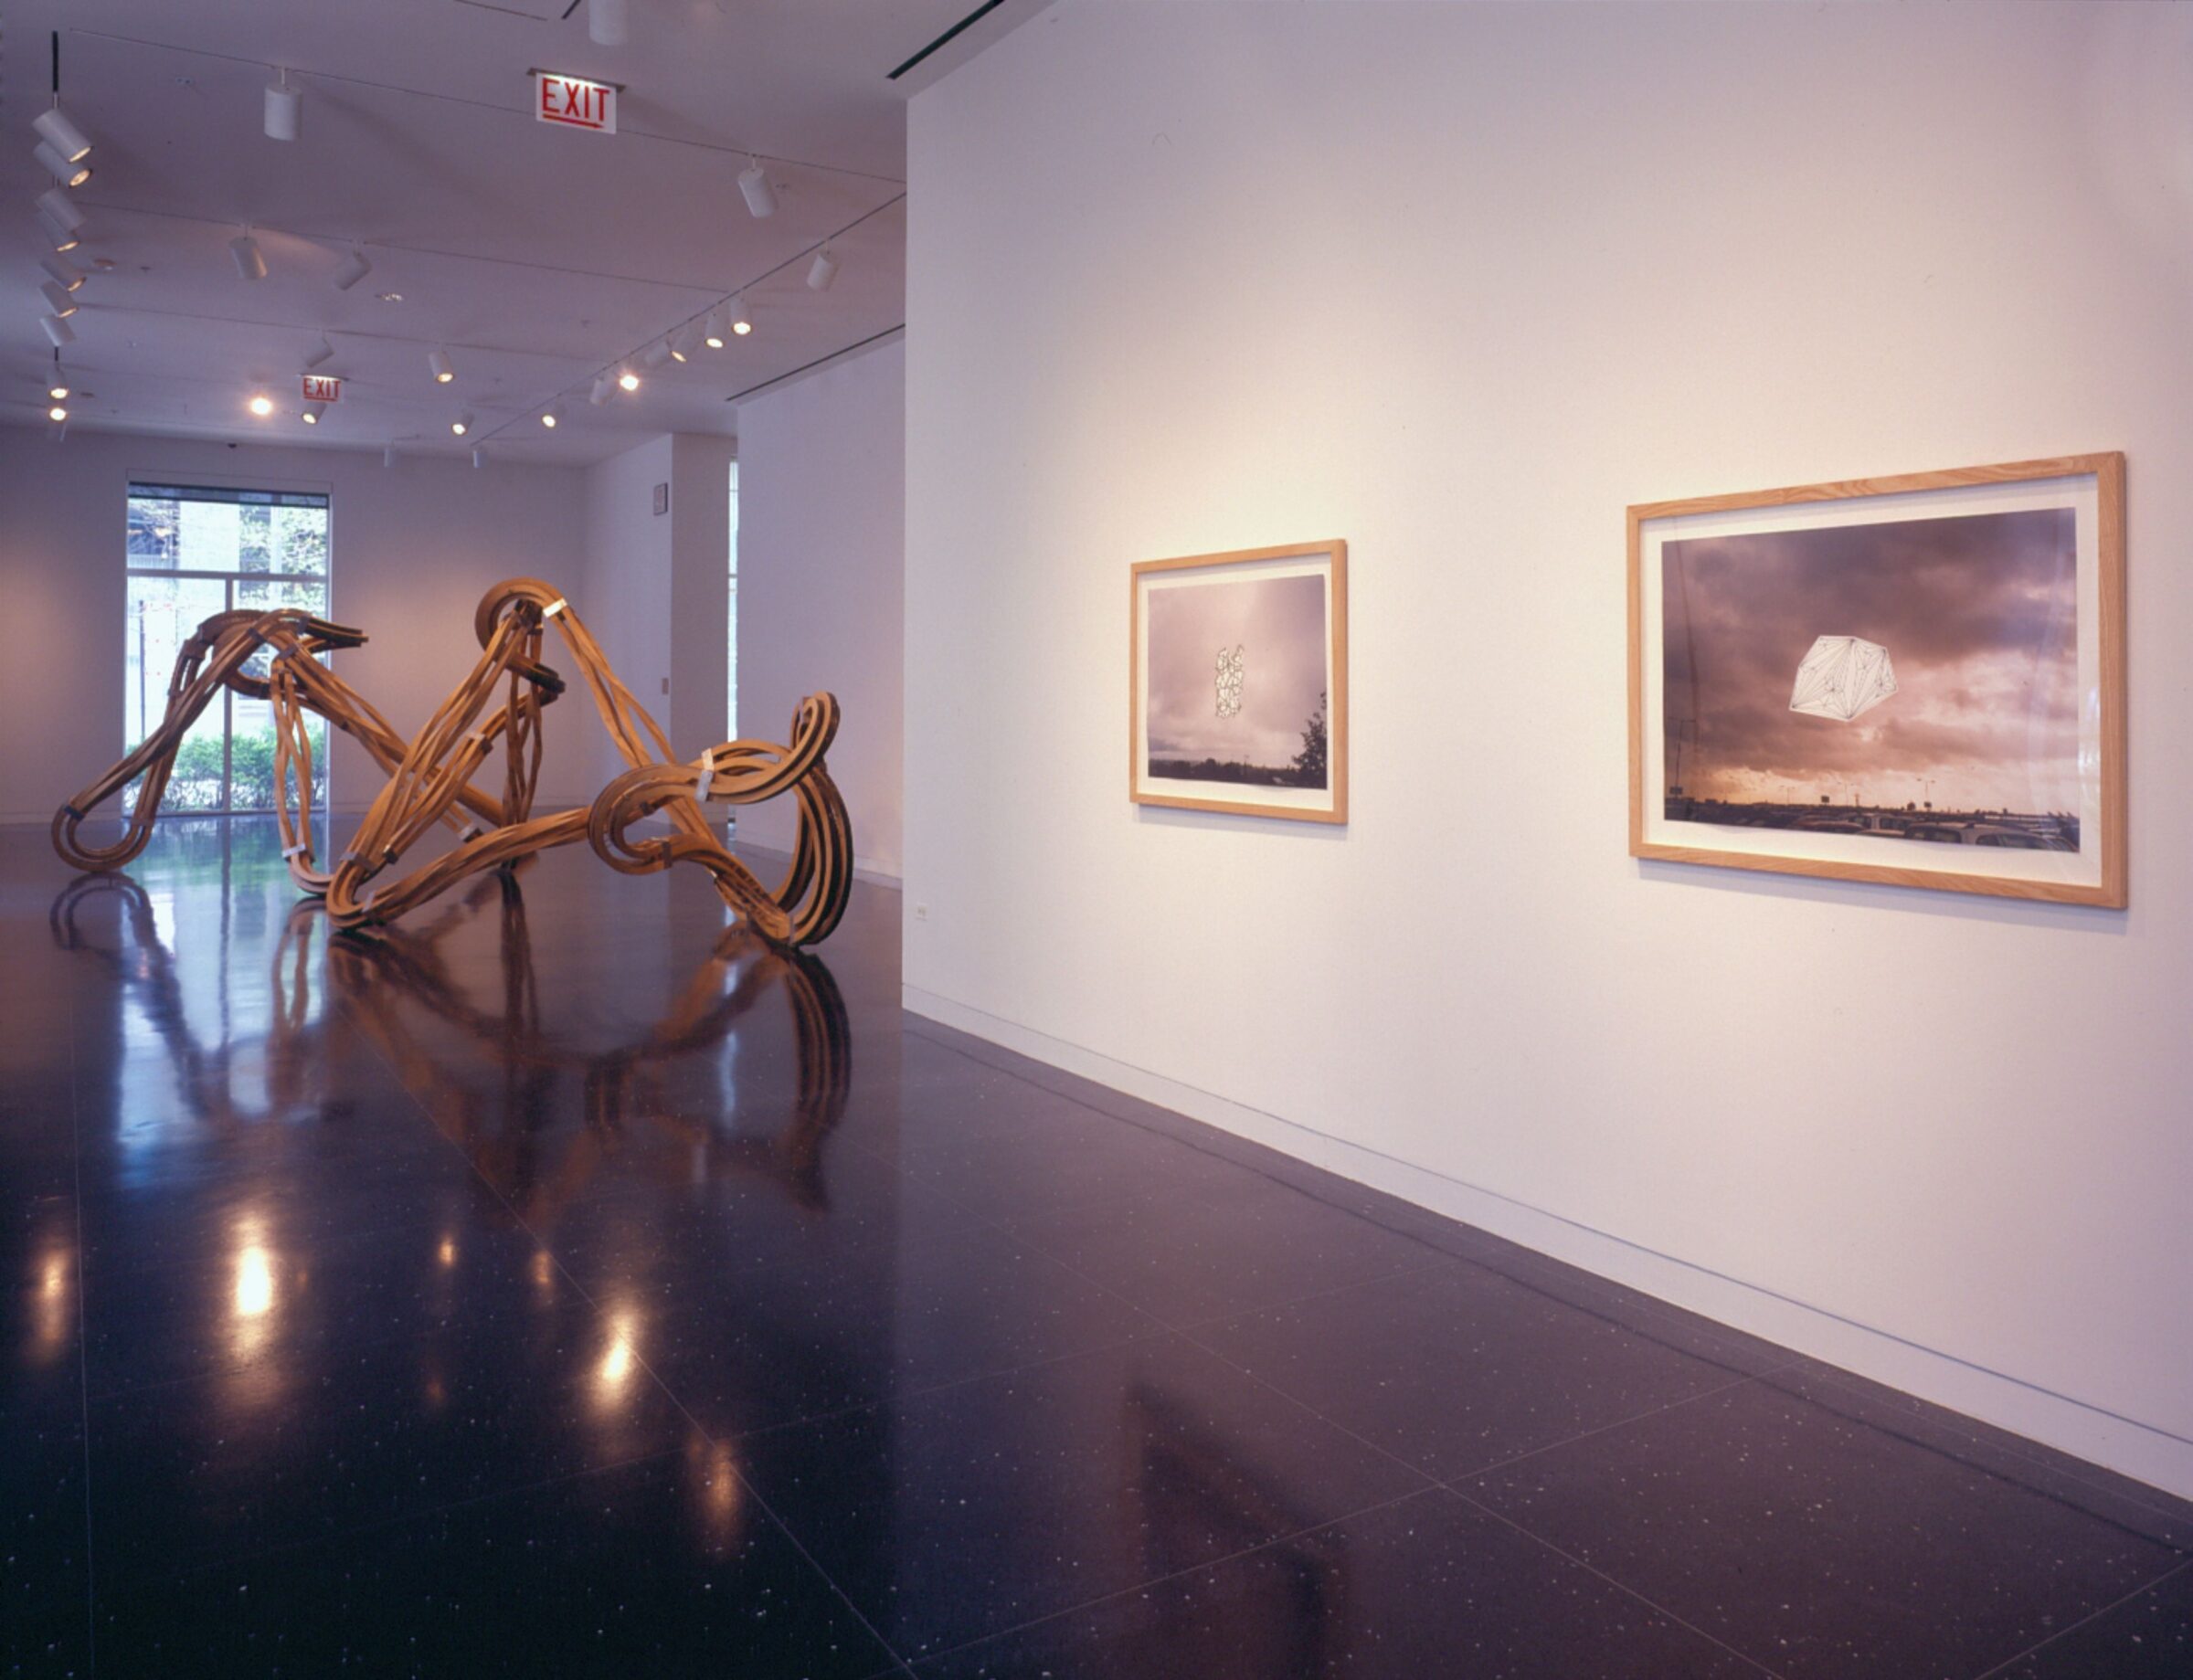 A white gallery space with two framed black and white photographs on a wall next to the viewer and a large bronze sculpture occupying the majority of the distant gallery space.